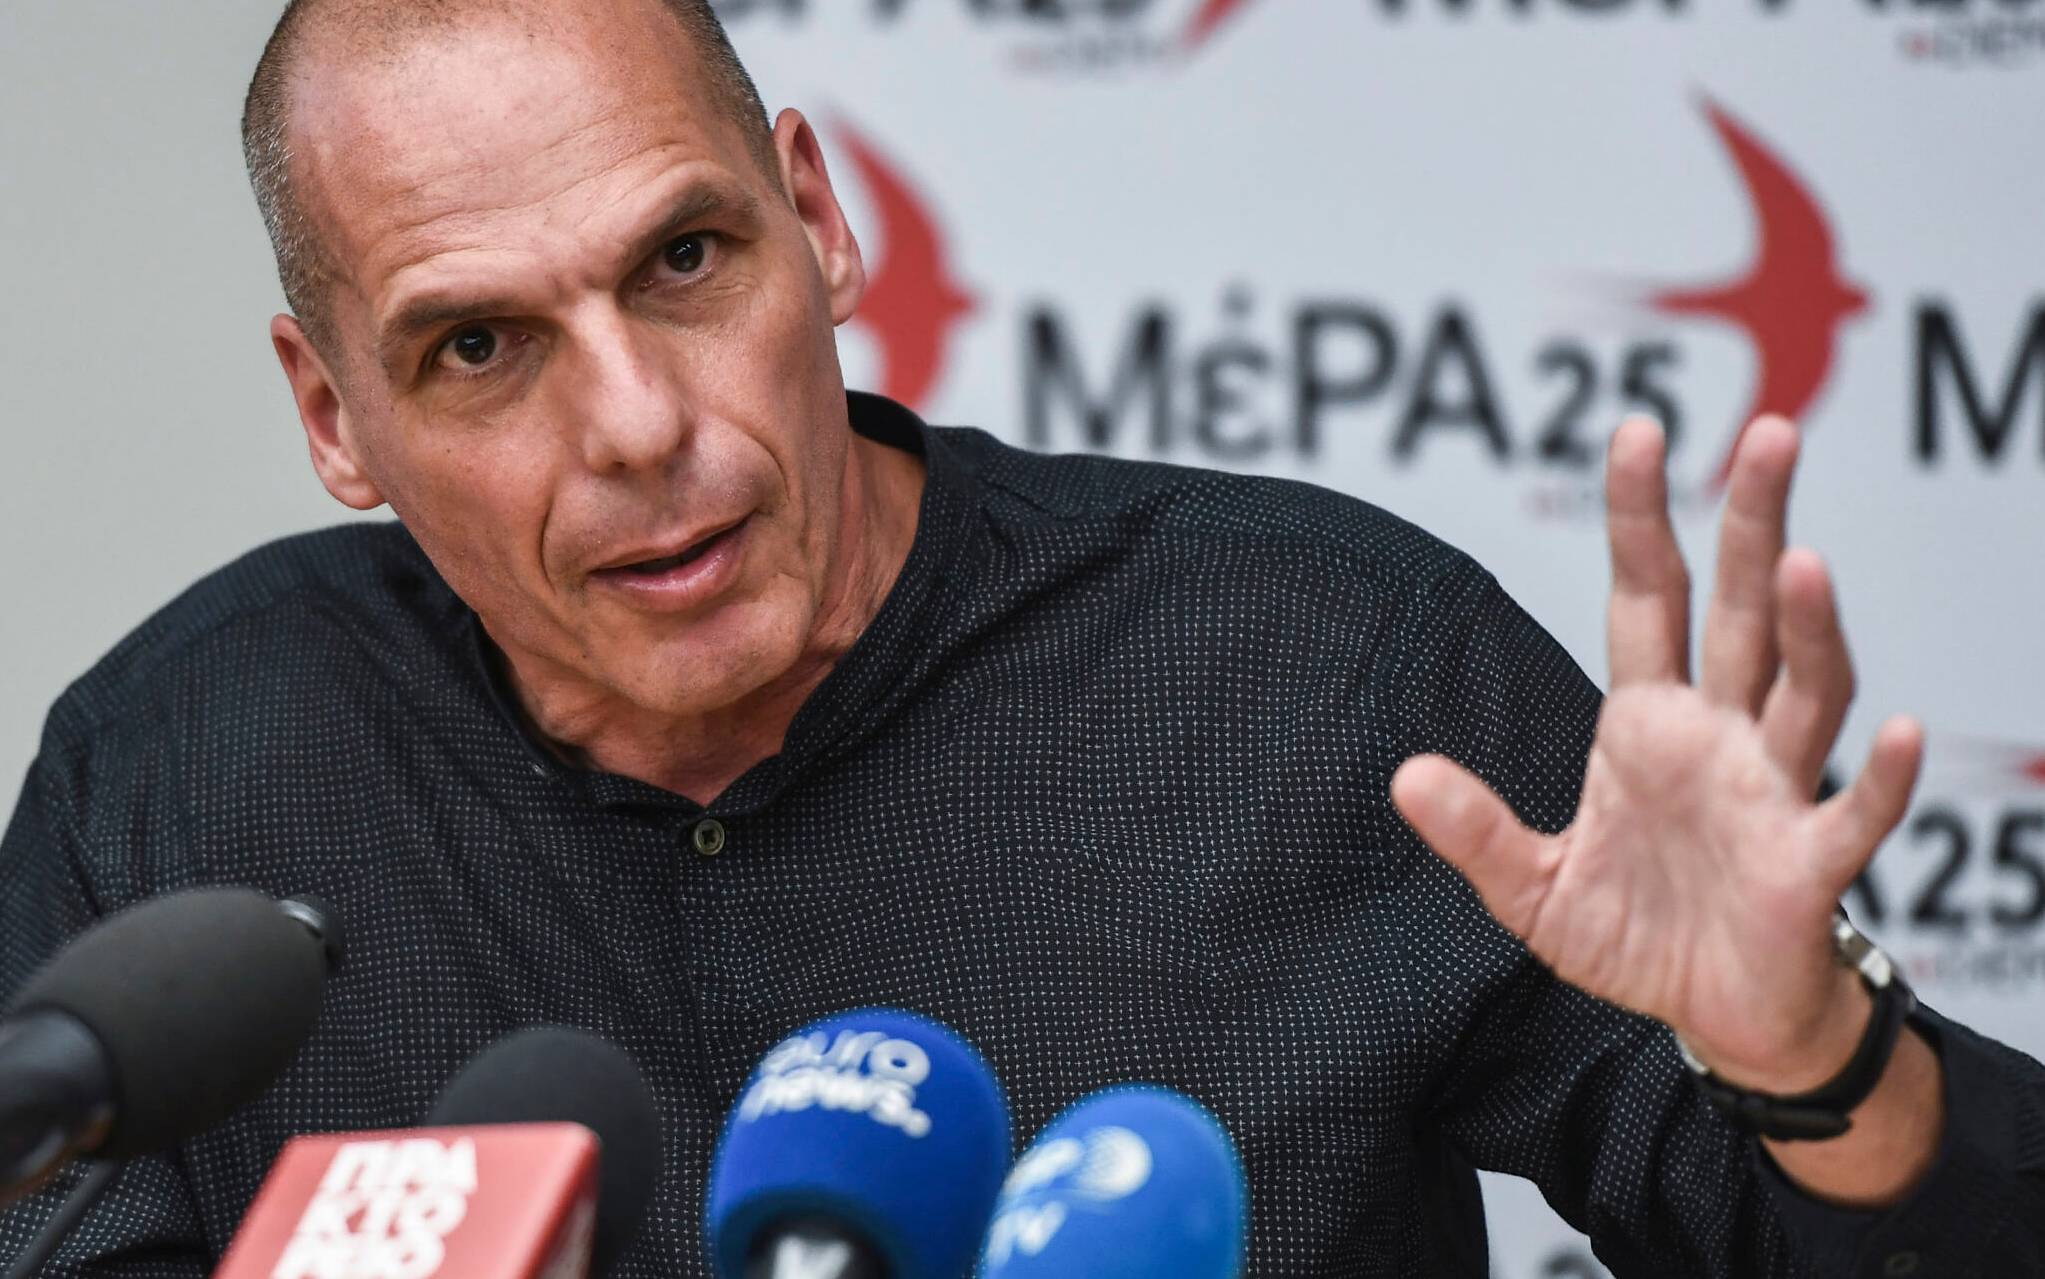 Yanis Varoufakis, leader of the anti-establishment European Realistic Disobedience Front (MeRA25) movement, DiEM25's electoral wing in Greece, gestures as he speaks during a press conferense following the results of last week end's European parliamentary elections on May 29, 2019 in Athens. - Varoufakis' party missed out a European Parliament seat in the European elections on May 26, and will now participate in Greek general elections that will be held on July 7. (Photo by Aris MESSINIS / AFP)